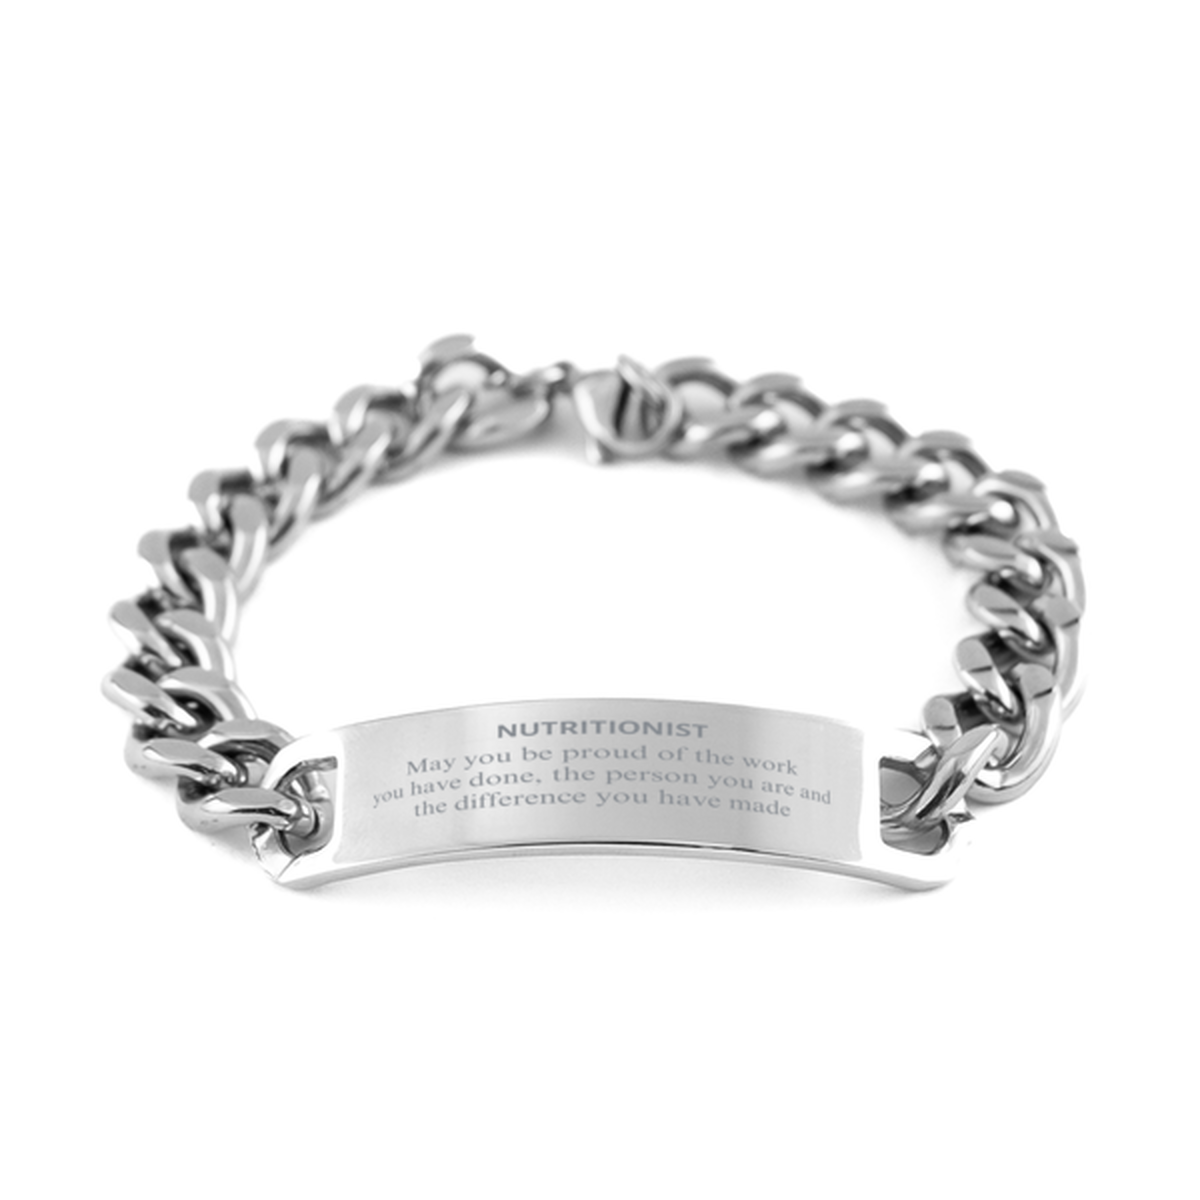 Nutritionist May you be proud of the work you have done, Retirement Nutritionist Cuban Chain Stainless Steel Bracelet for Colleague Appreciation Gifts Amazing for Nutritionist